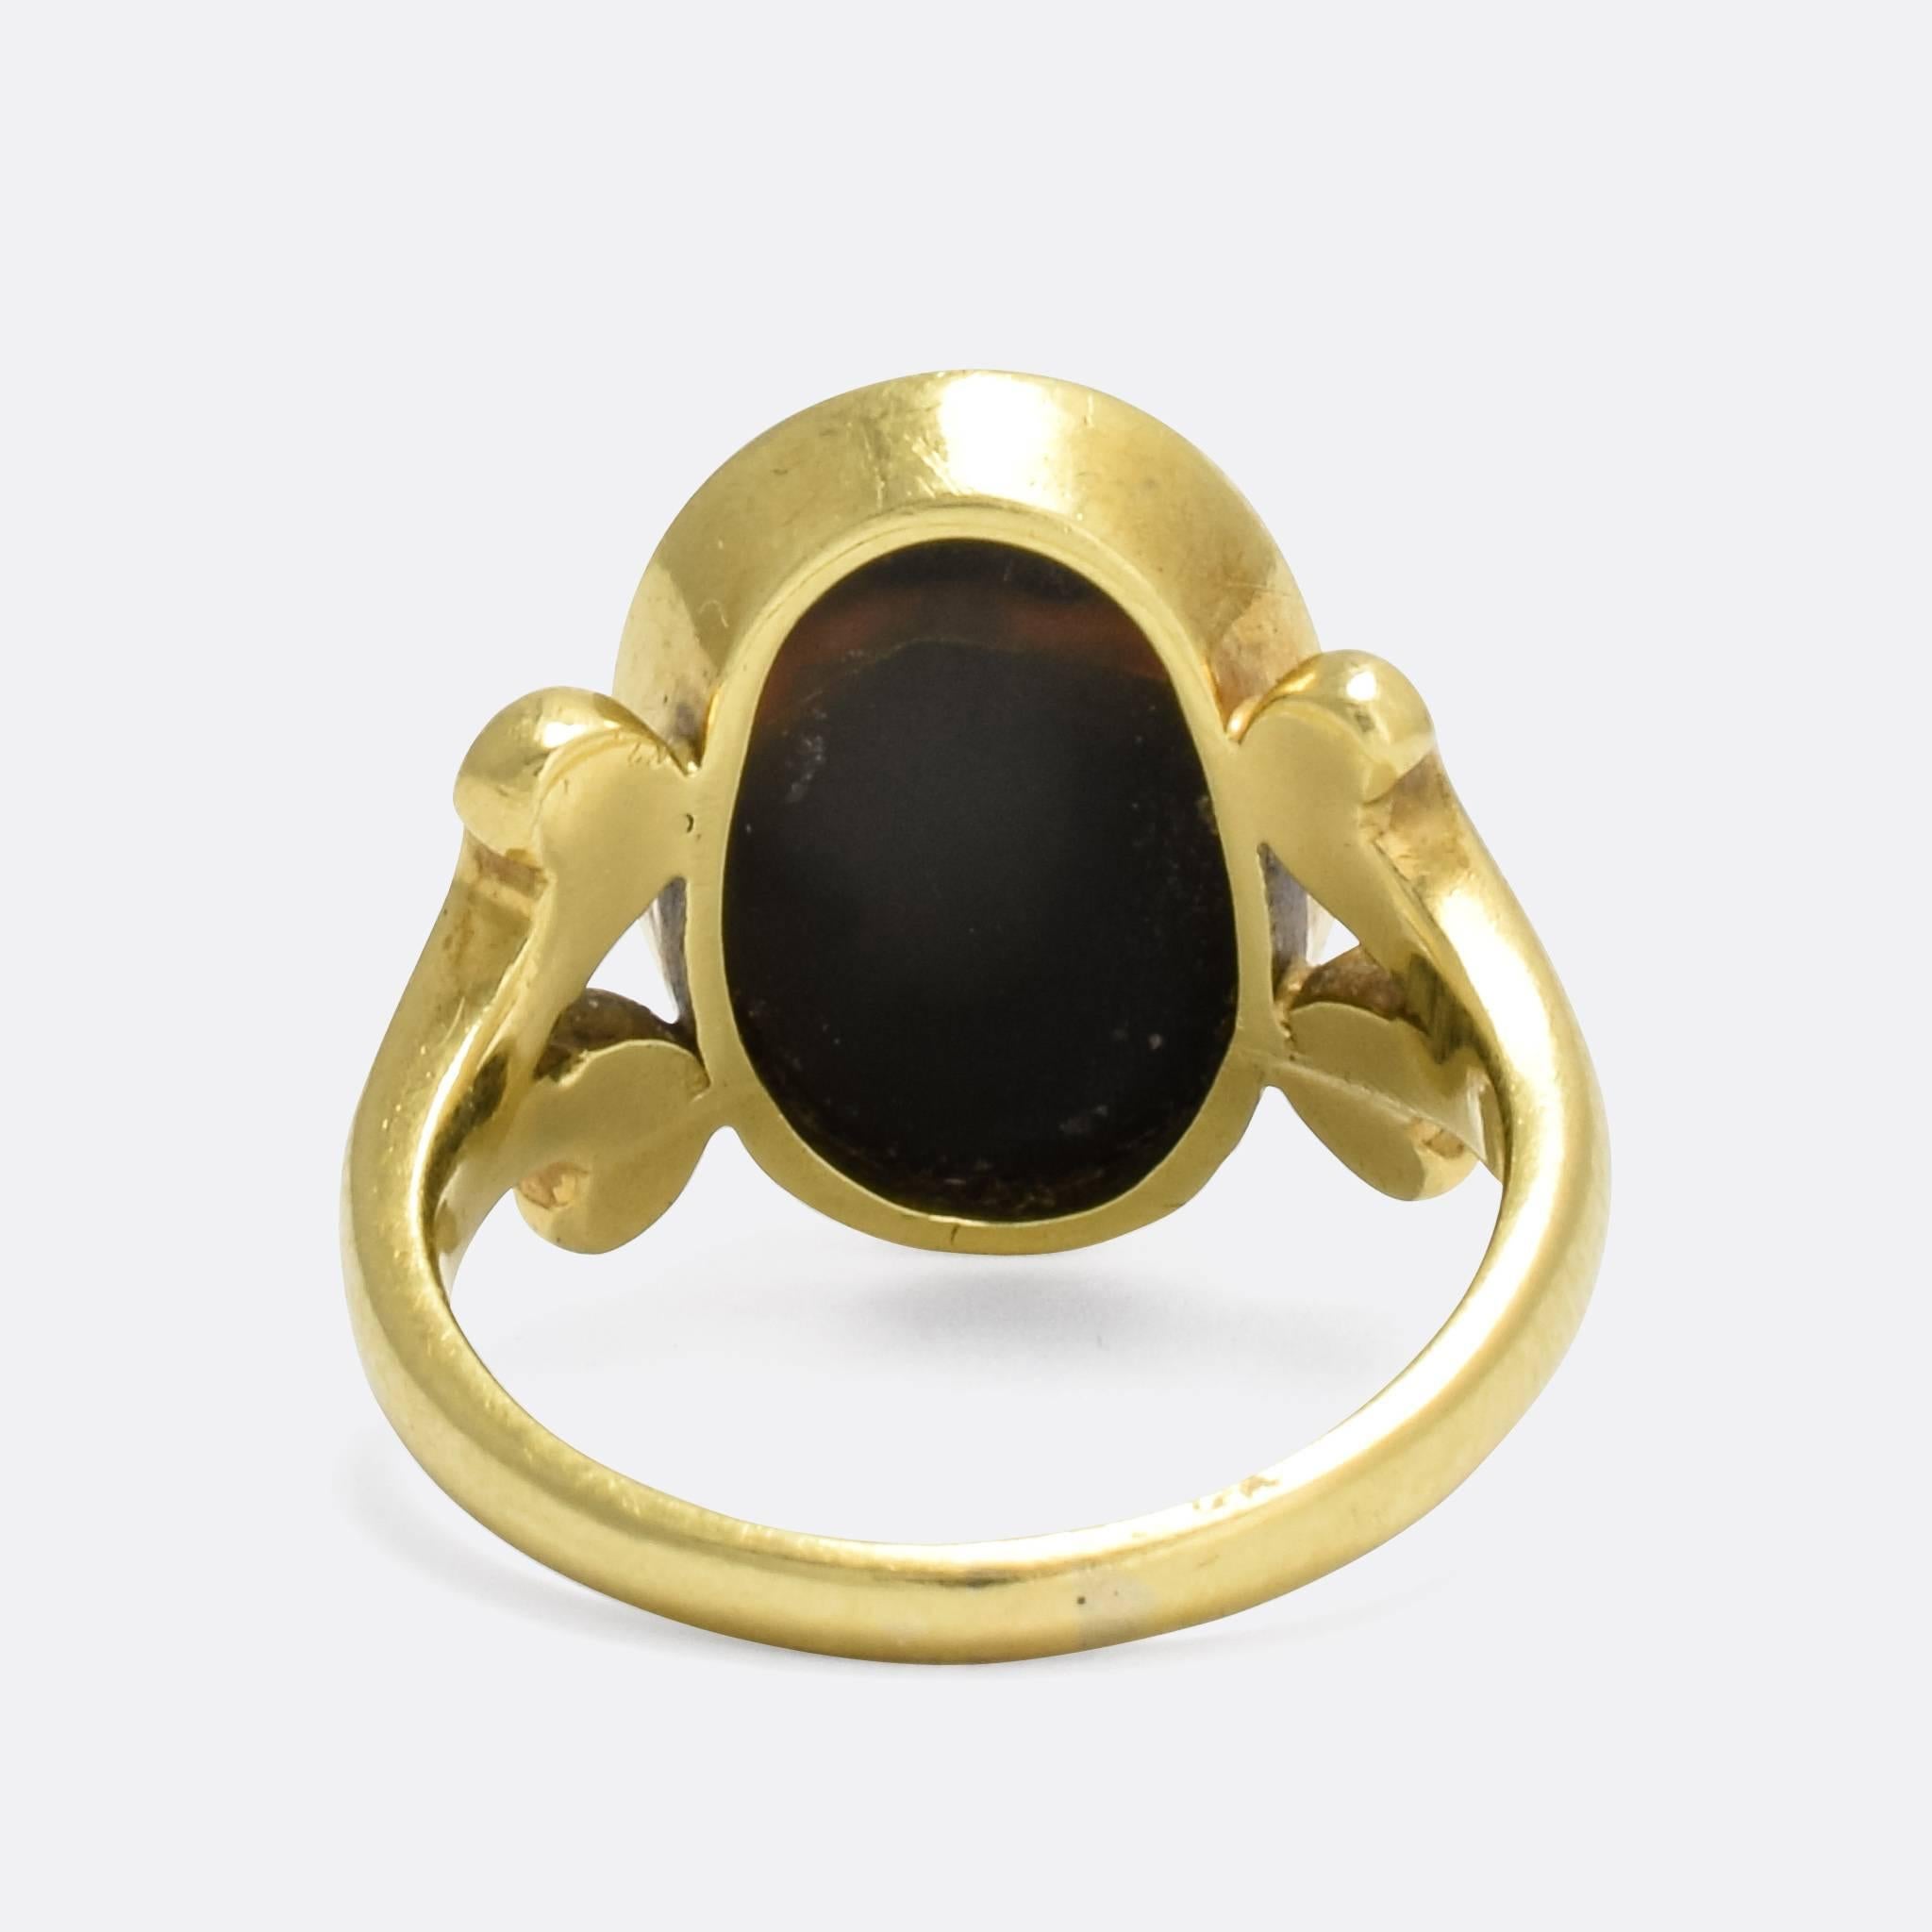 bloodstone signet ring meaning